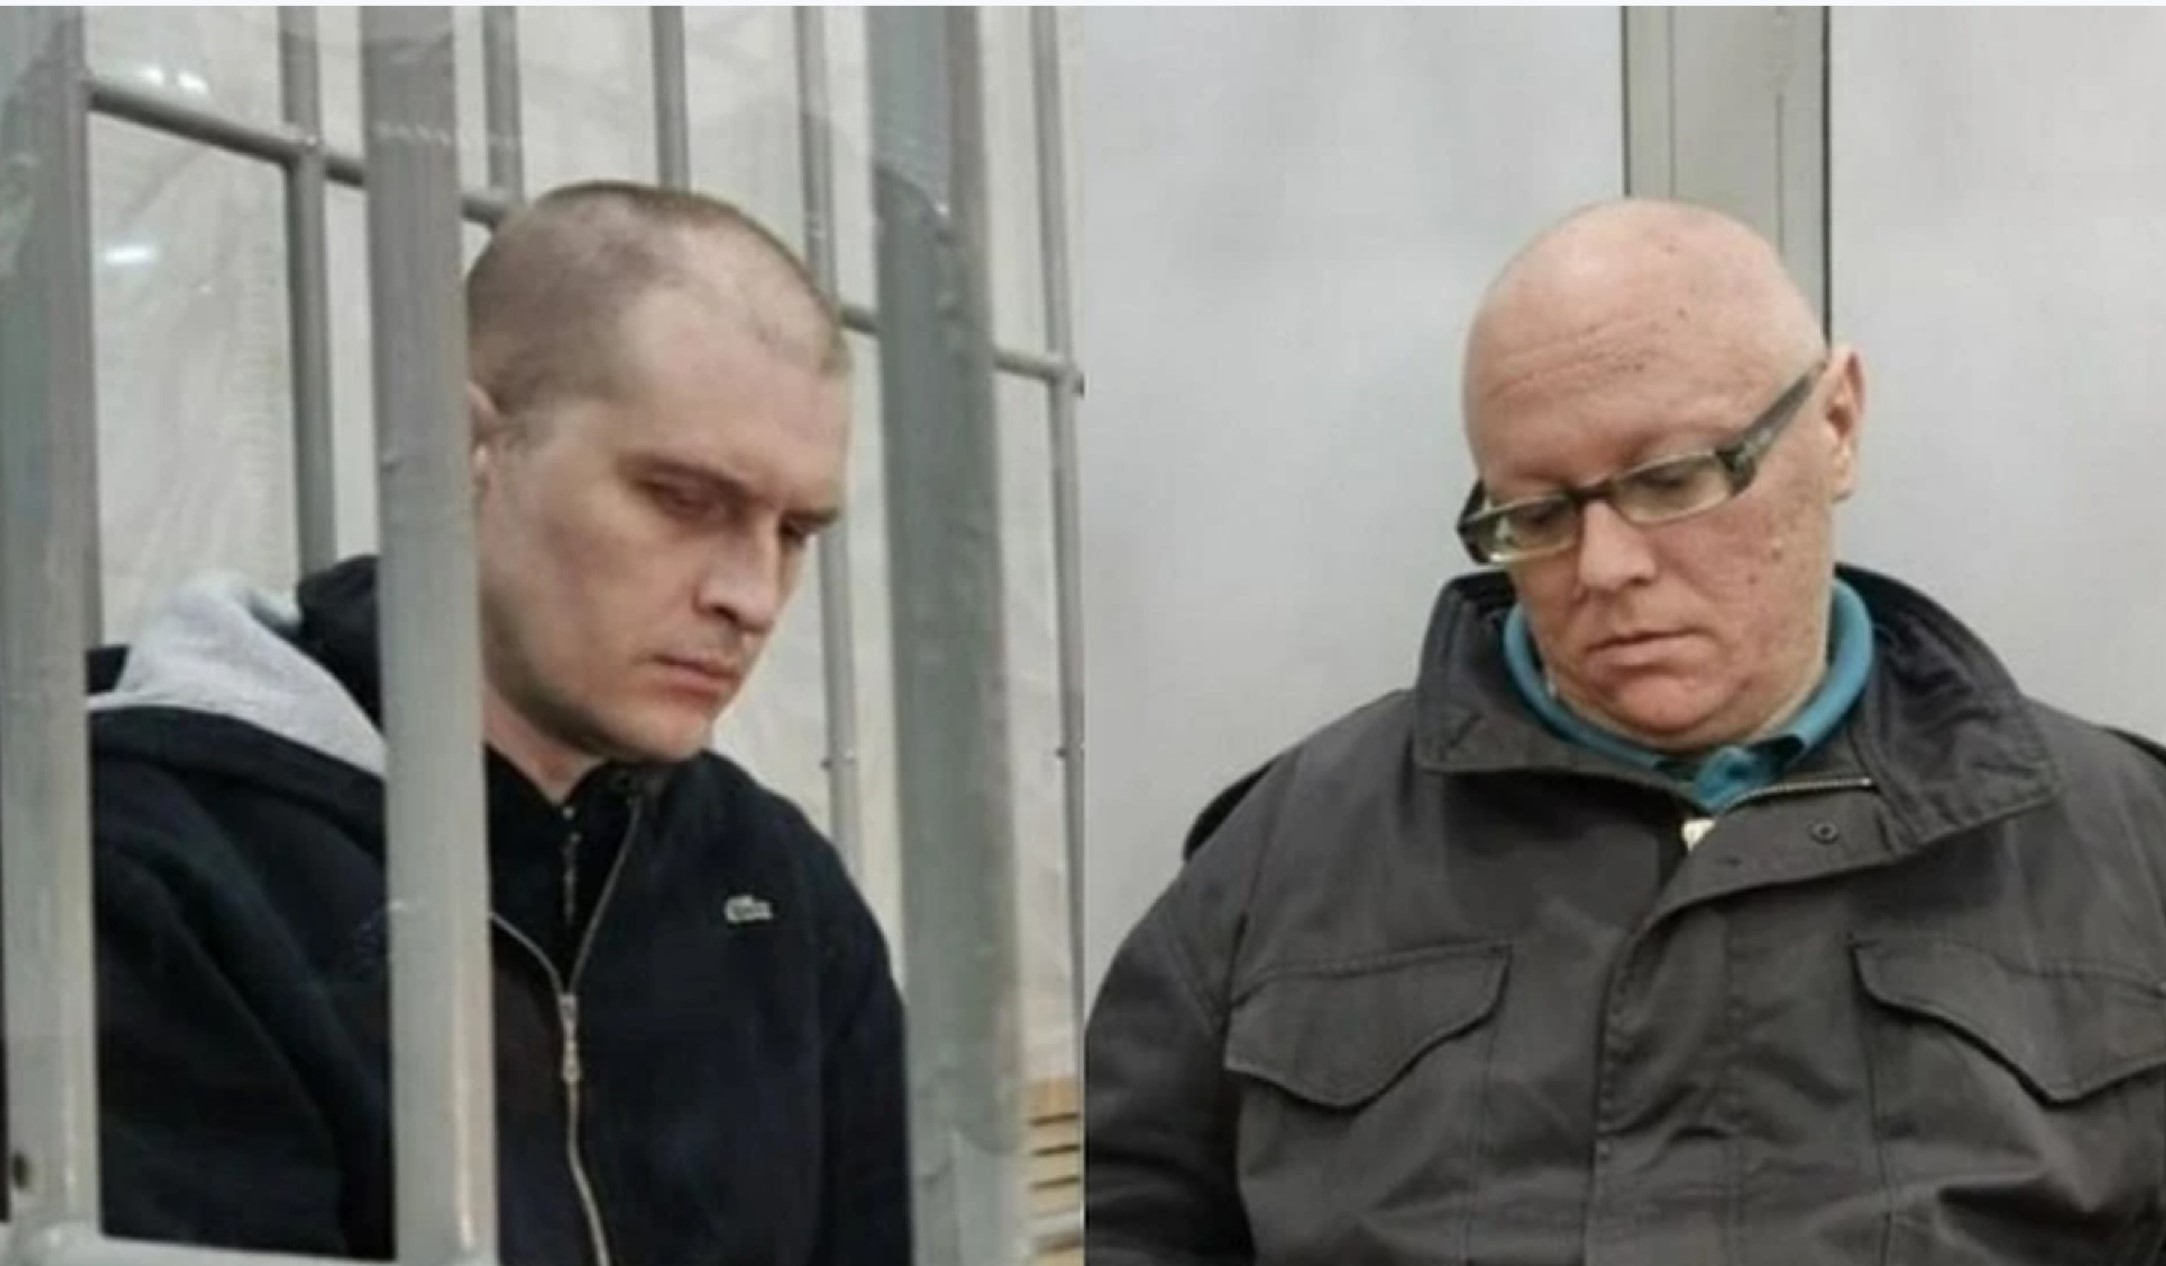 From left Maksym Petrov, Dmytro Shabanov Photo by necessity from the video footage produced for ’LPR’ and Russian propaganda channels